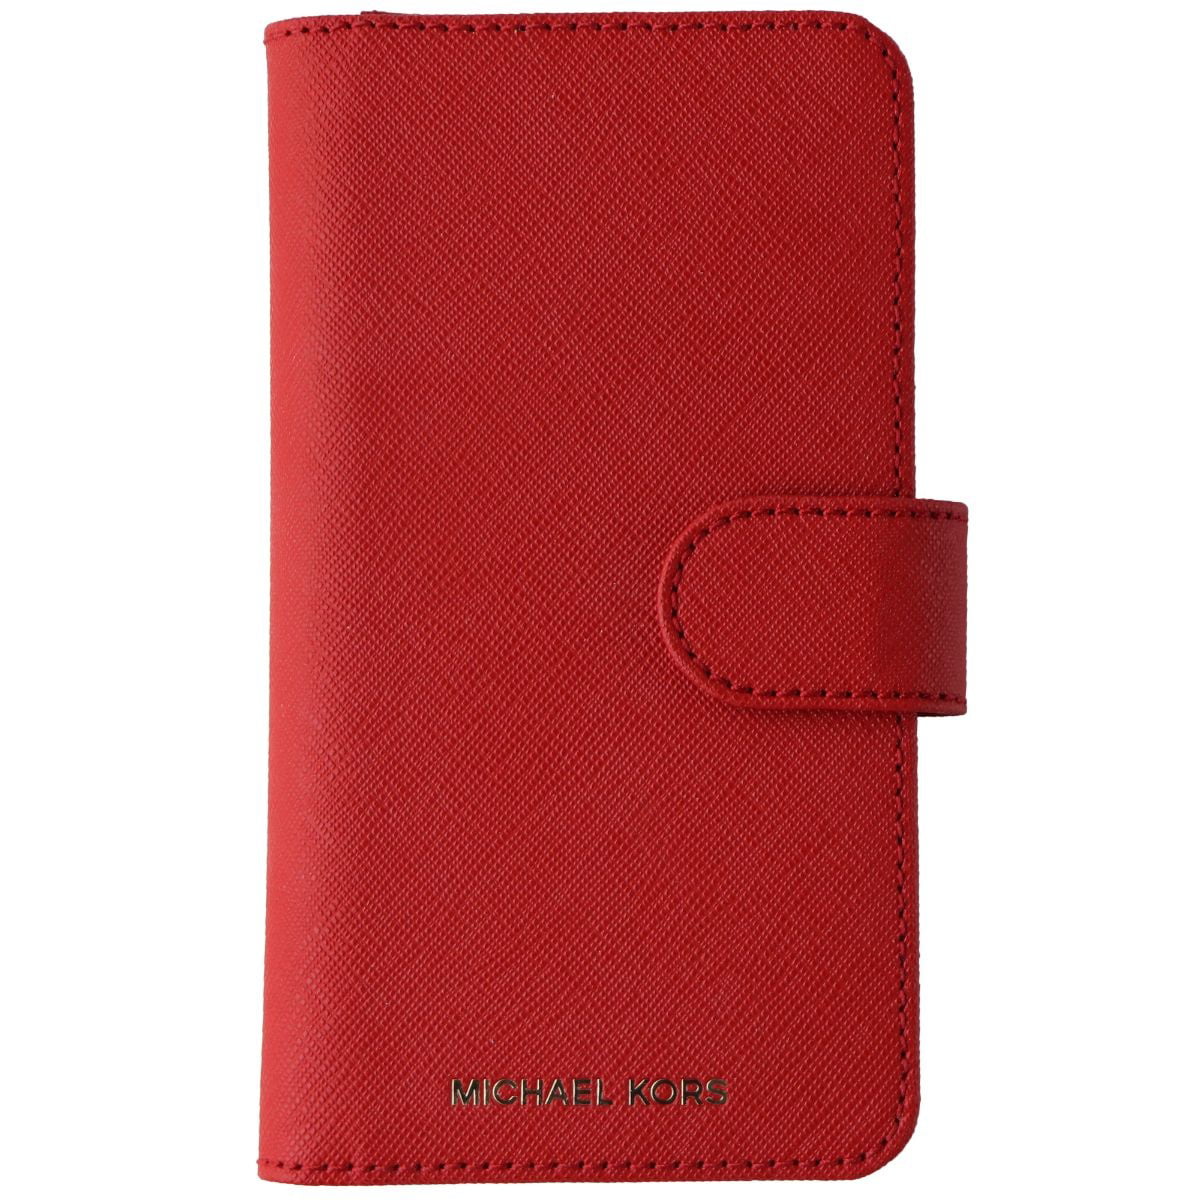 Michael Kors Folio Phone Case For iPhone X / iPhone XS - Bright Red |  Walmart Canada